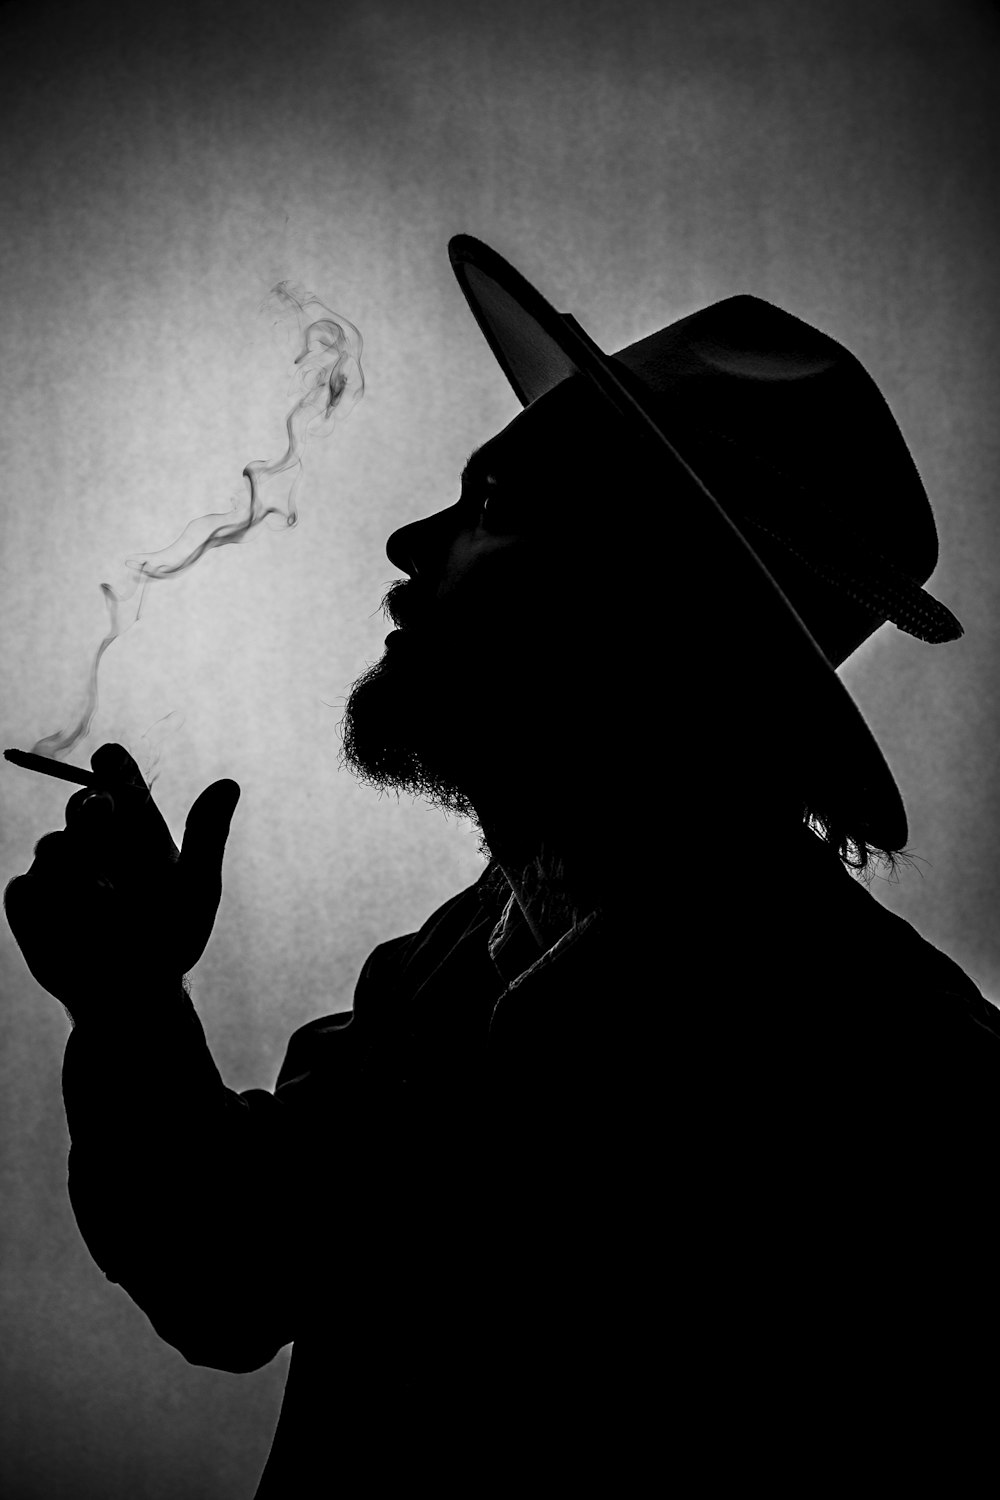 a man in a hat smoking a cigarette